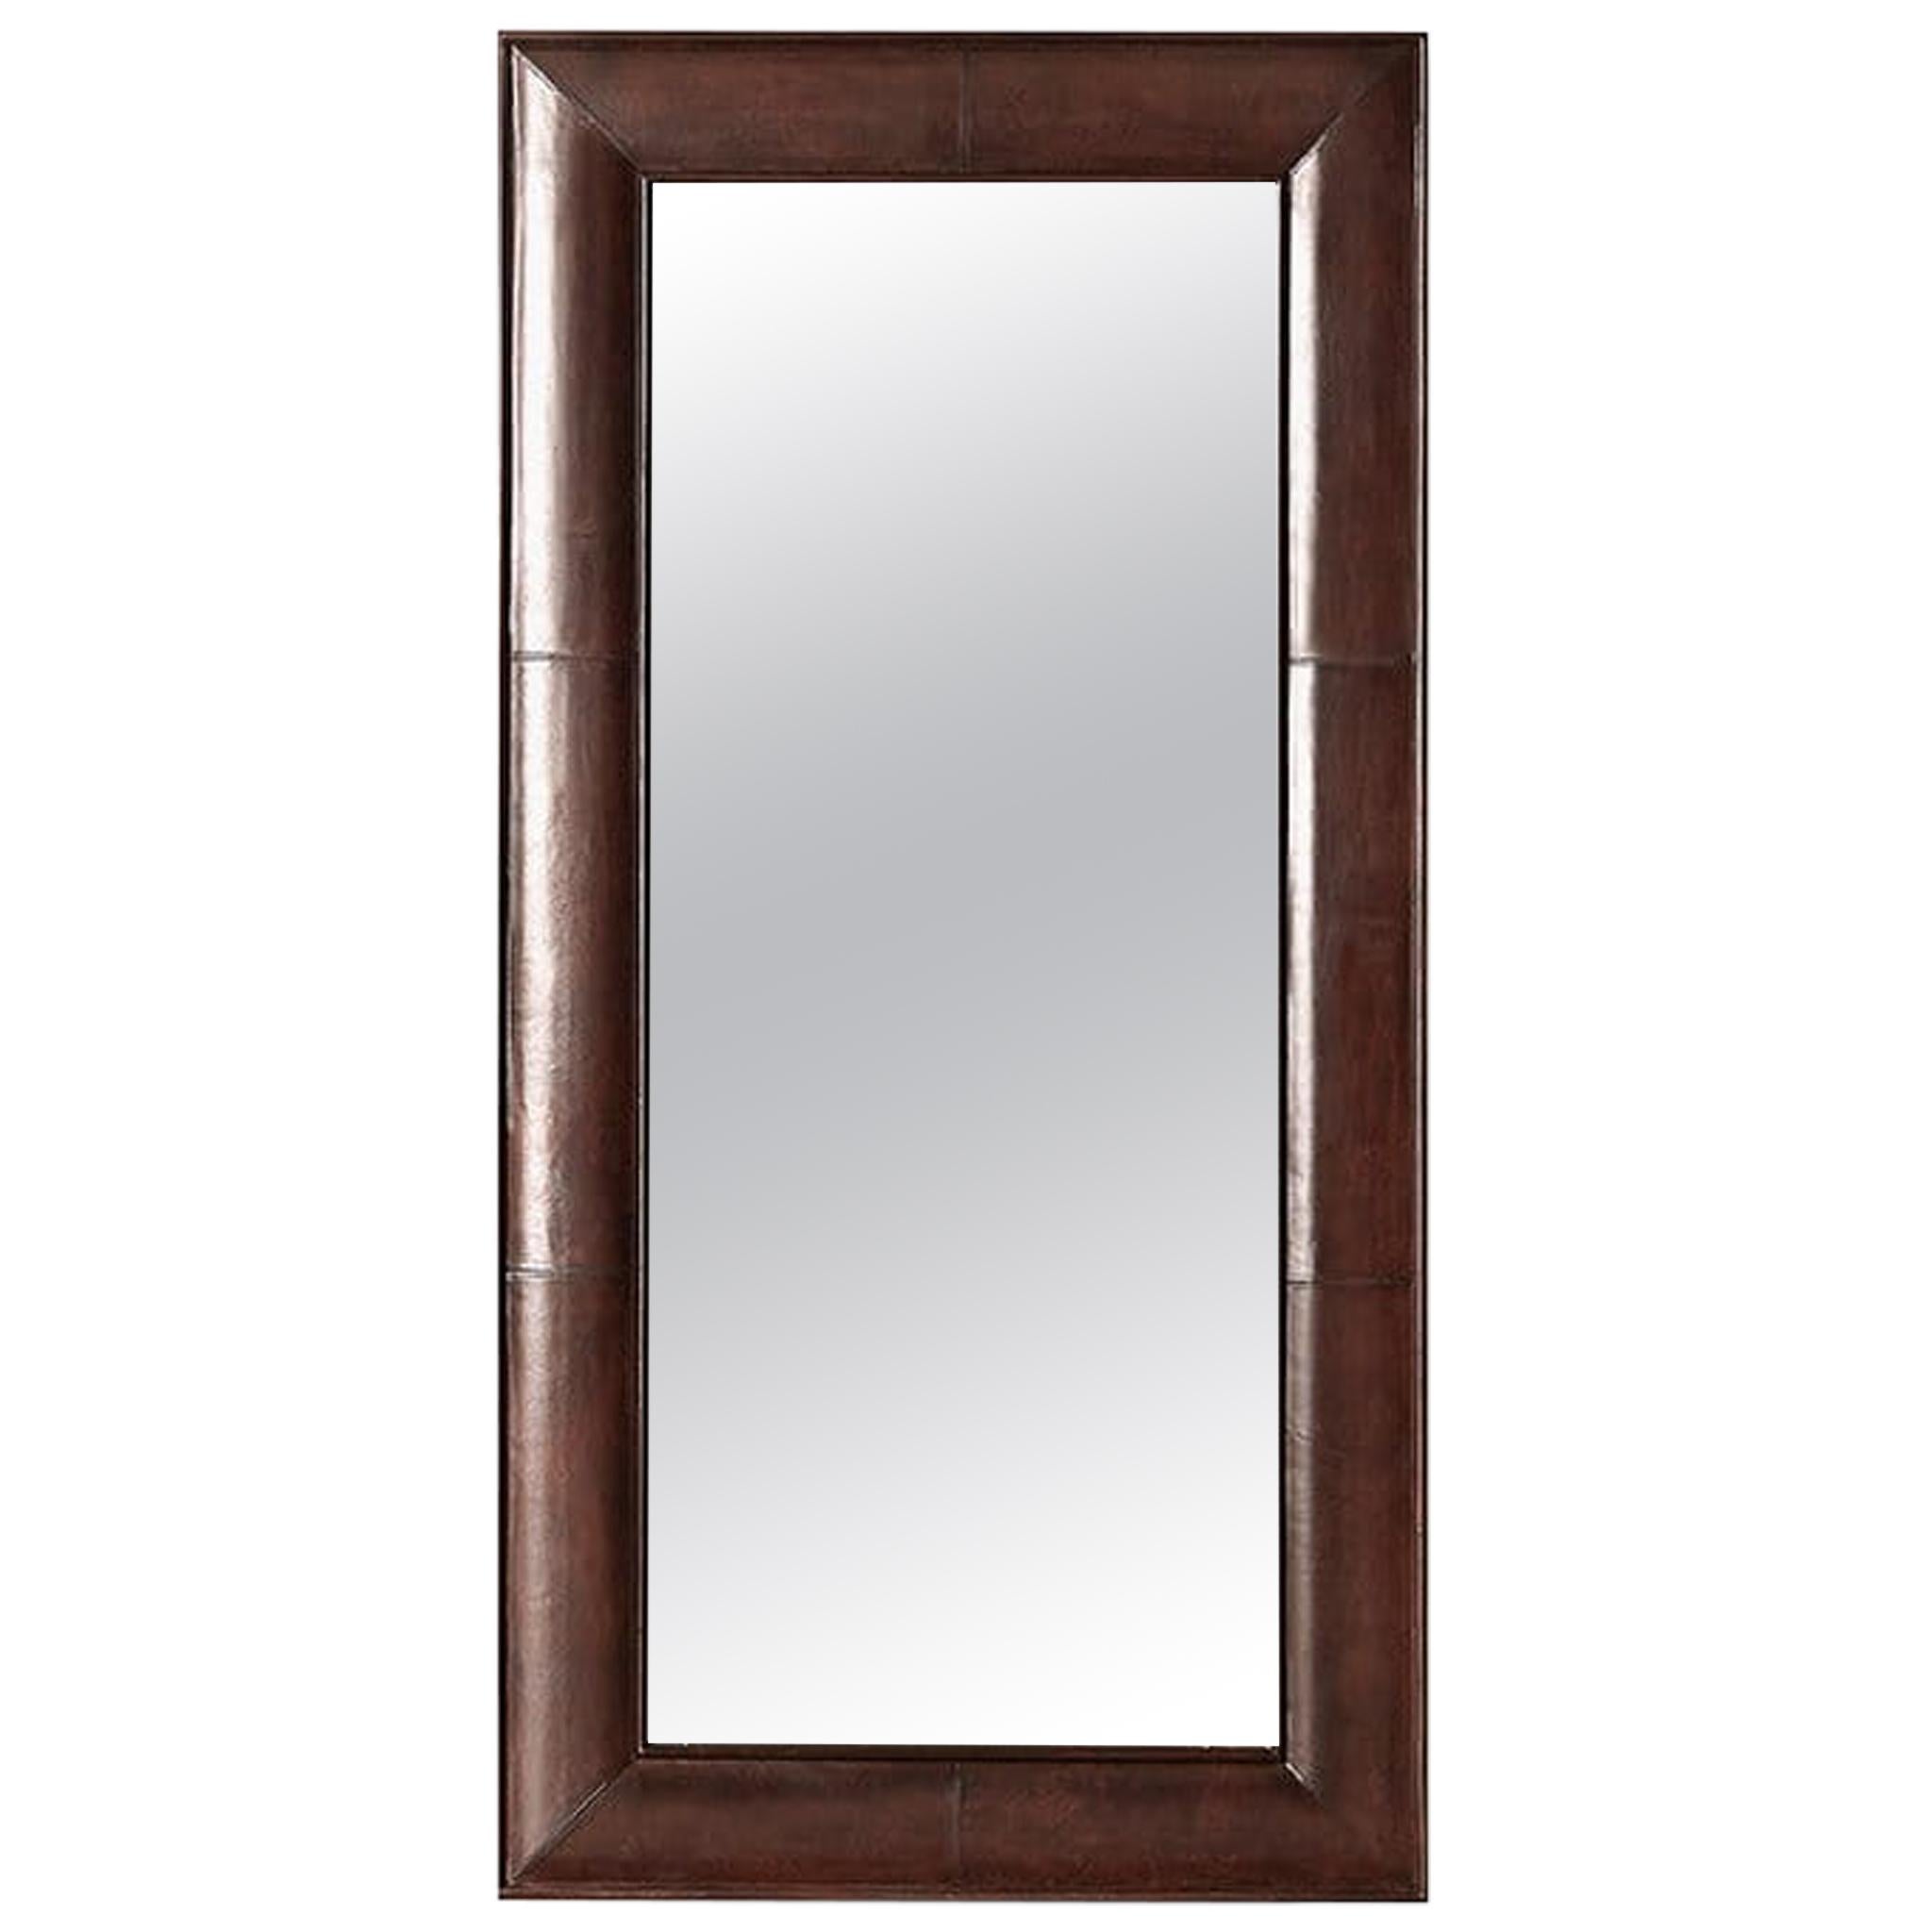 Ben Soleimani Clove Wall Mirror in Leather - Camel For Sale